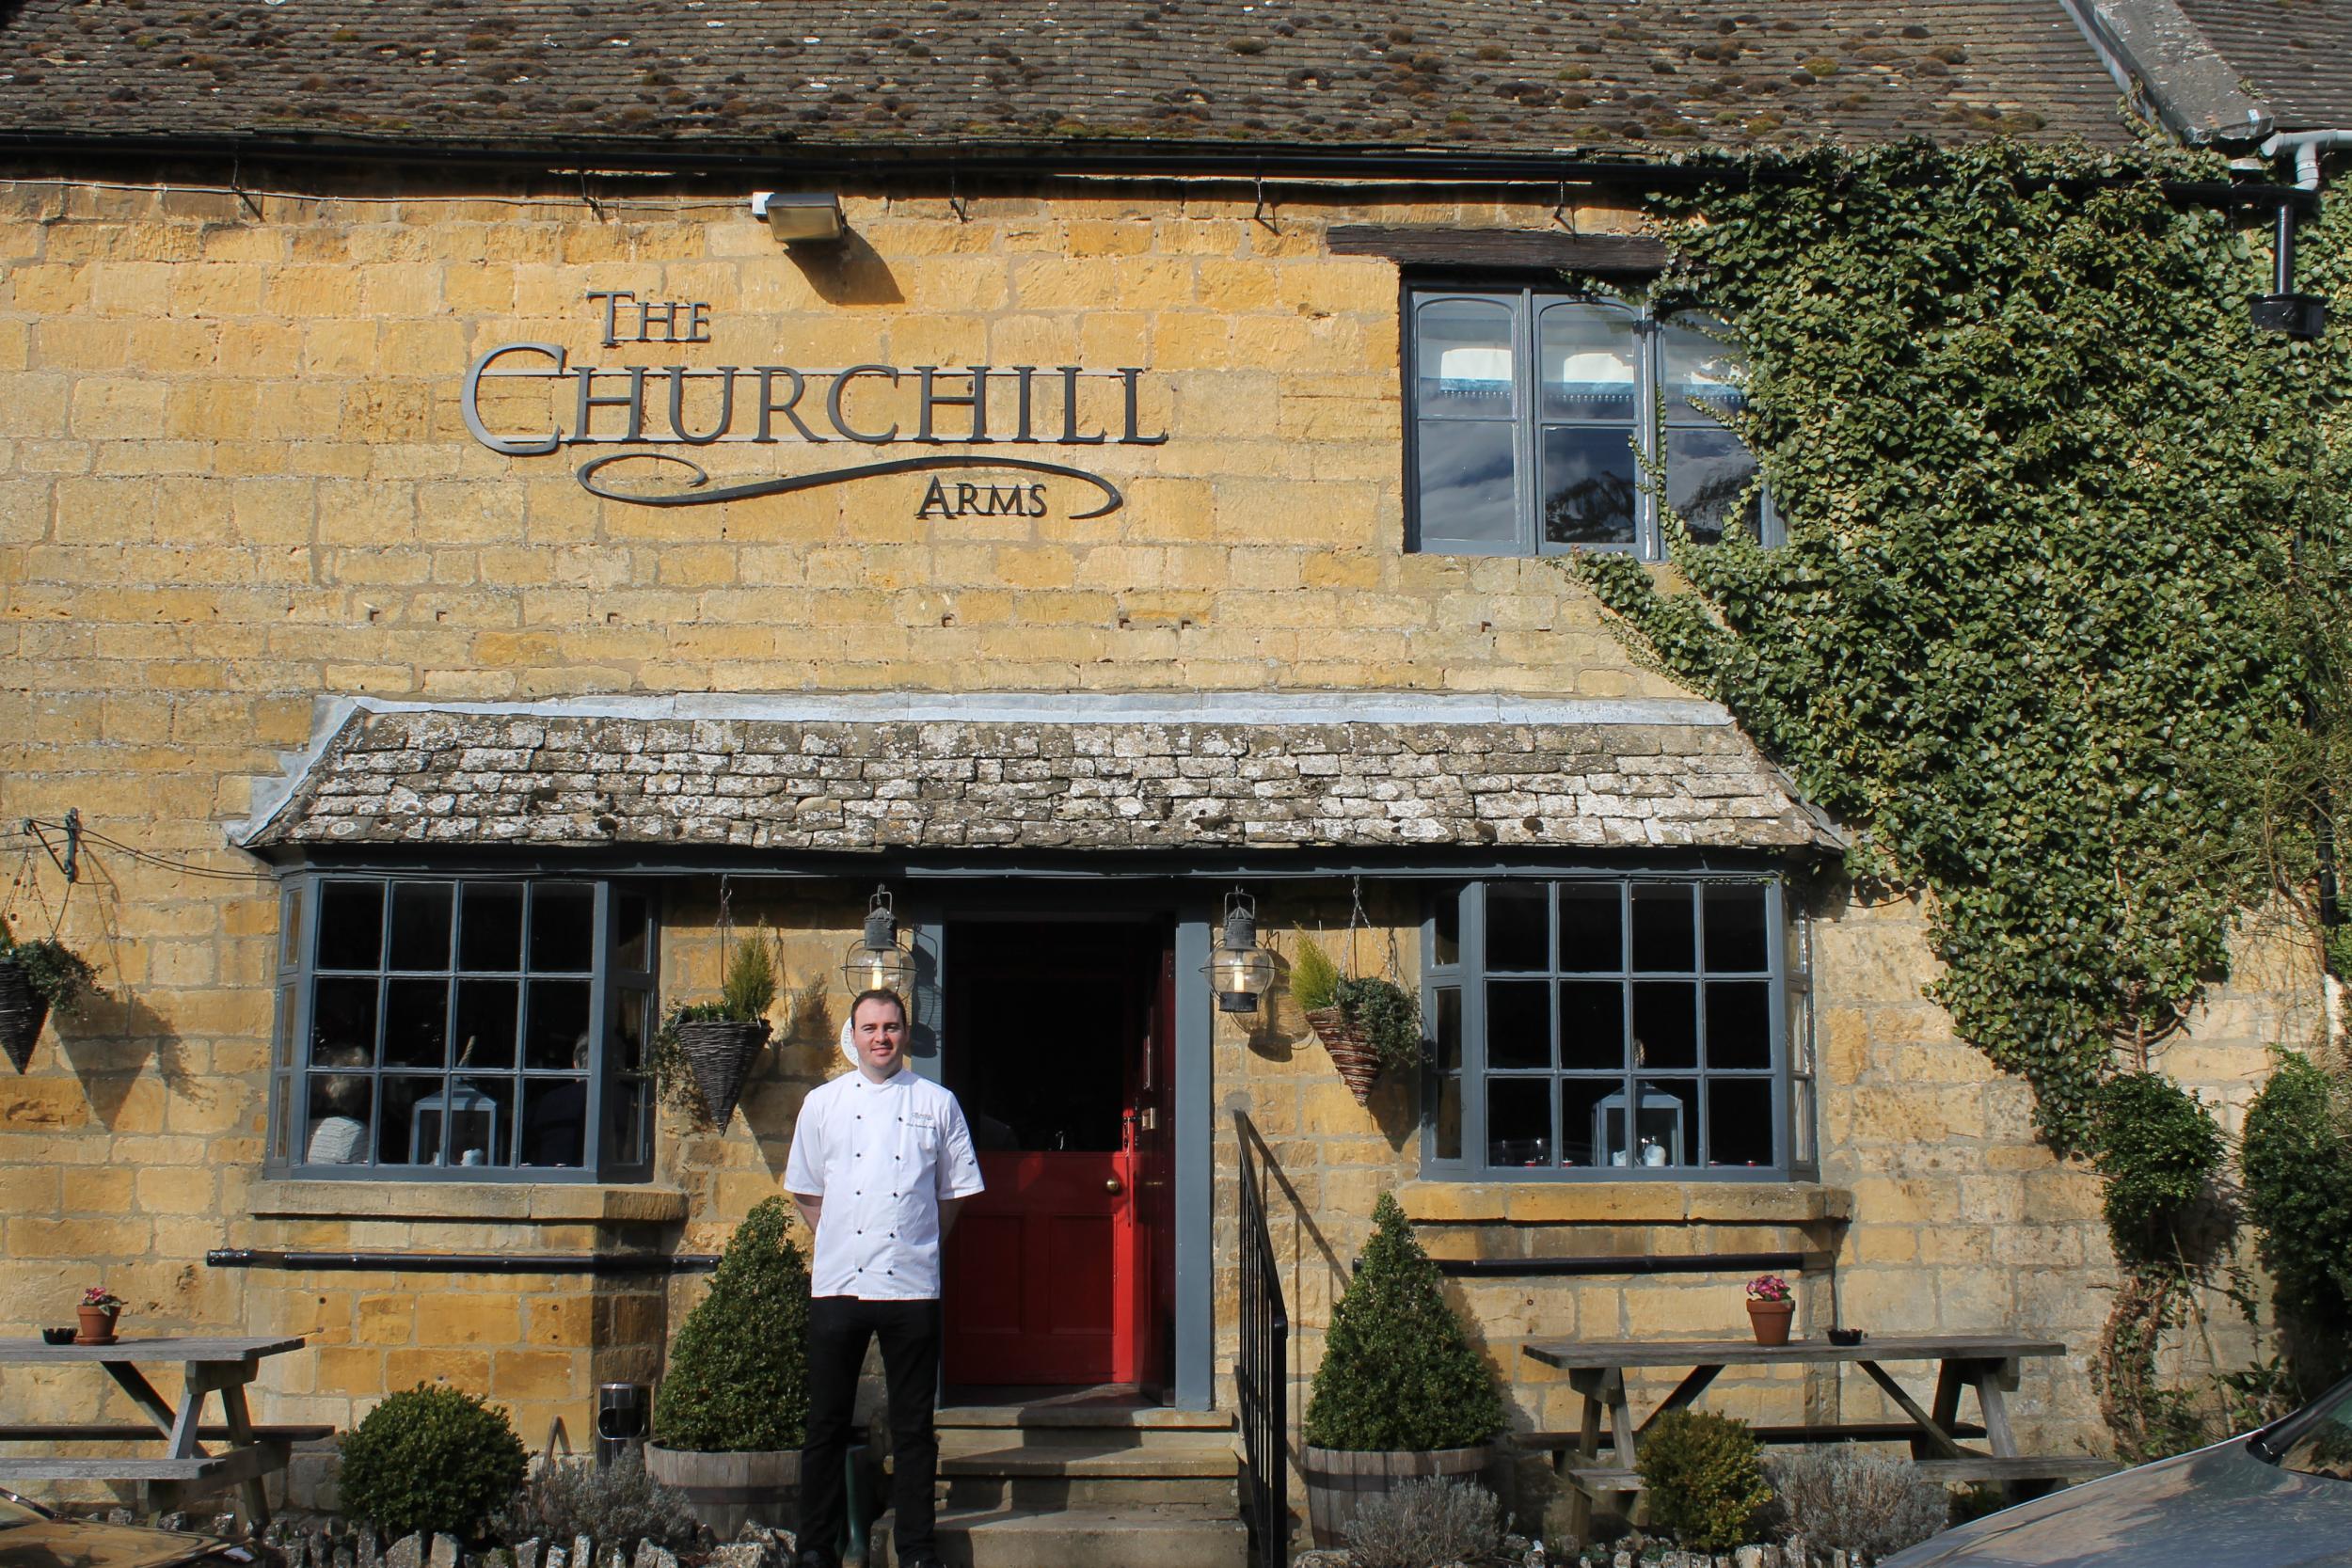 Deverell-Smith has worked under Marcus Wareing and Gordon Ramsay